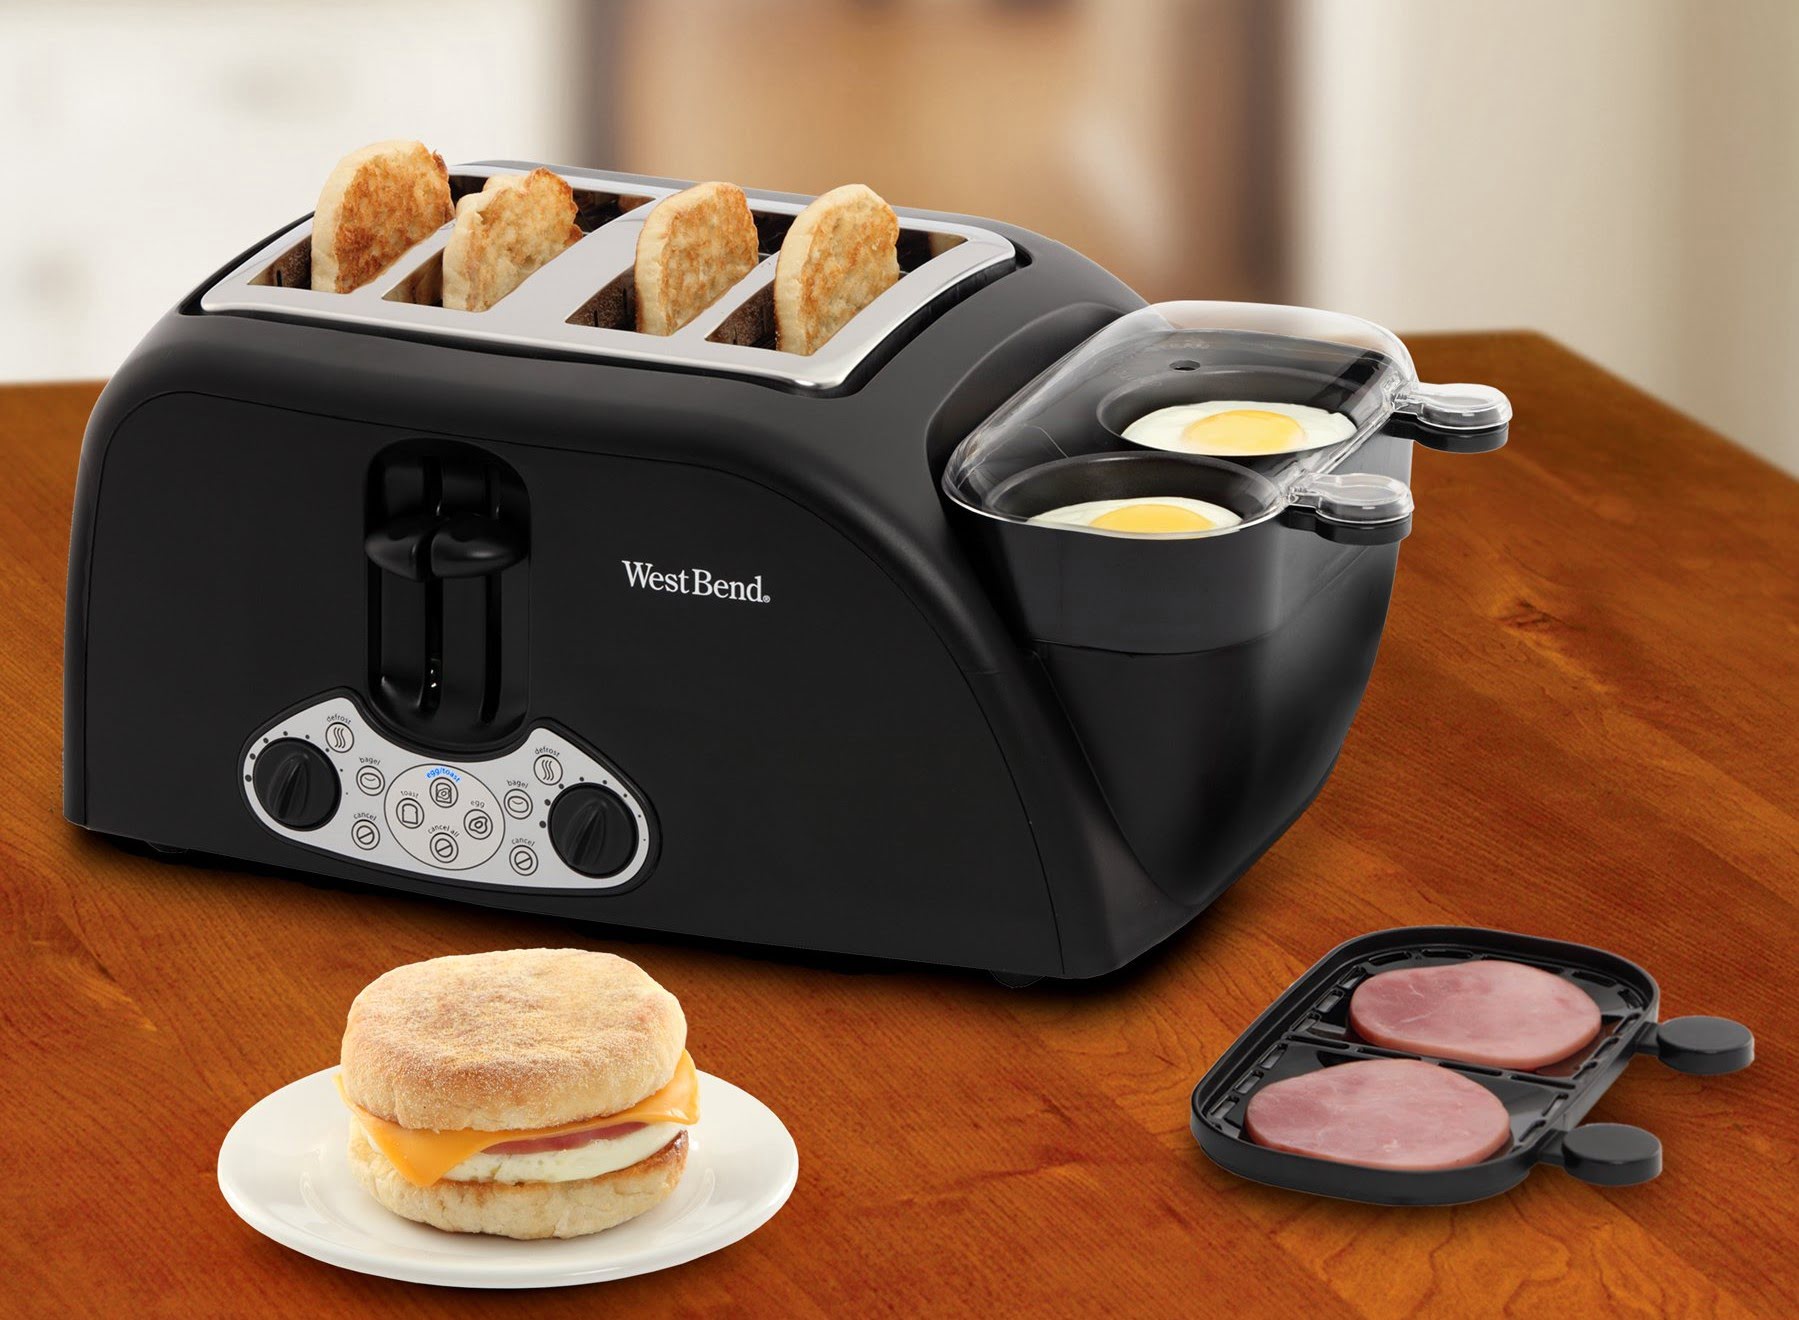 https://storables.com/wp-content/uploads/2023/08/8-incredible-west-bend-toaster-for-2023-1691064745.jpg